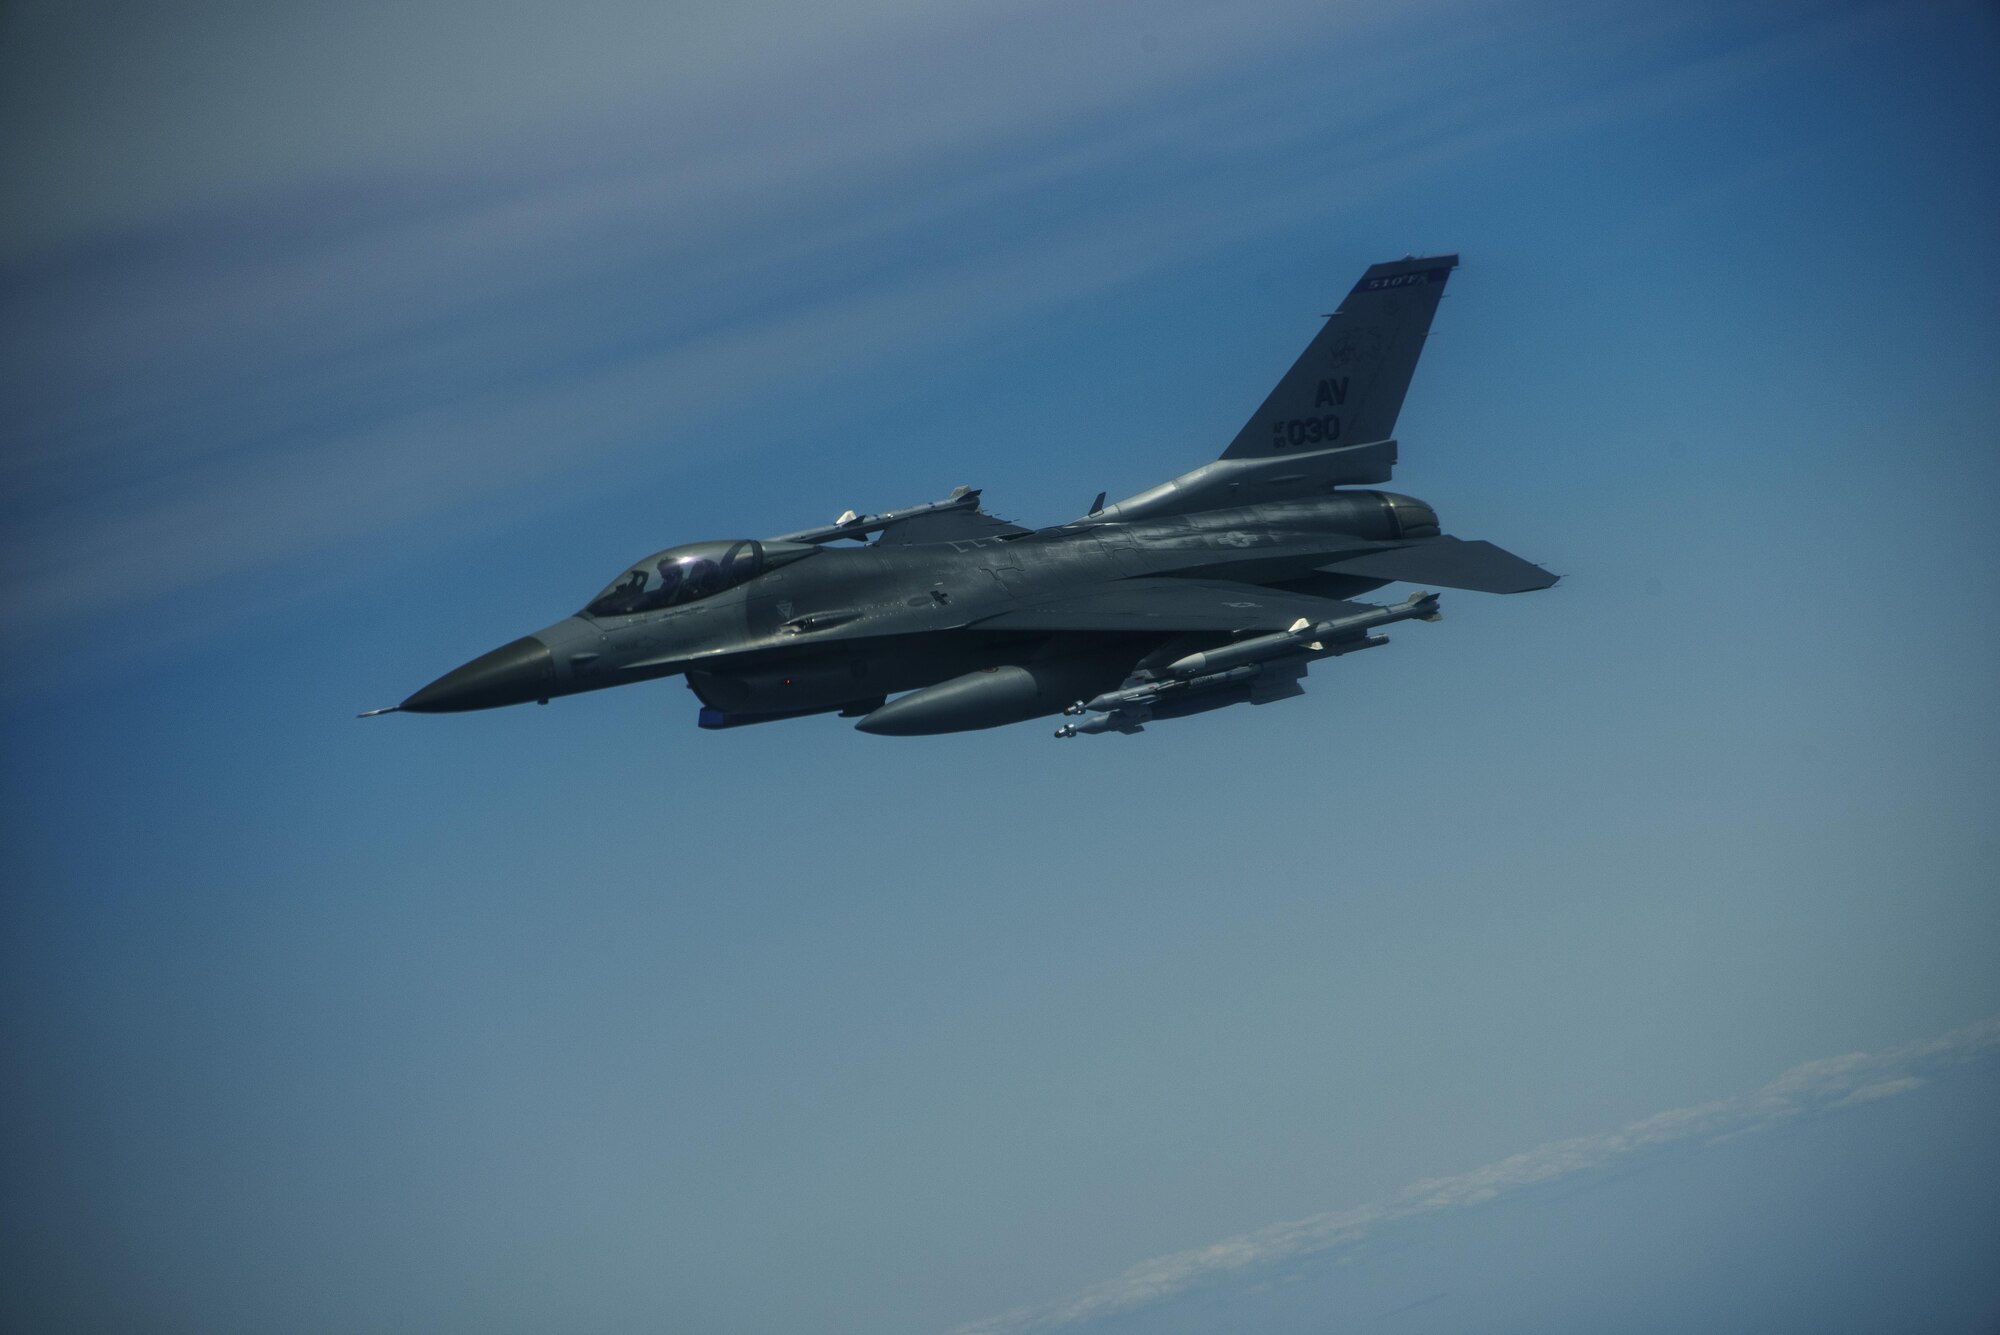 An F-16 Fighting Falcon, 510th Fighter Squadron, is deployed to Krzesiny Air Base, Poland, in support of Aviation
Detachment rotation 17-3, exercise BALTOPS and exercise Saber Strike flies over Latvia, June 7, 2017. The
exercise, is designed to enhance flexibility and interoperability, to strengthen combined response capabilities, as well as demonstrate resolve among Allied and Partner Nations' forces to ensure stability in, and if necessary defend, the Baltic Sea region. (U.S. Air Force photo by Staff Sgt. Jonathan Snyder)